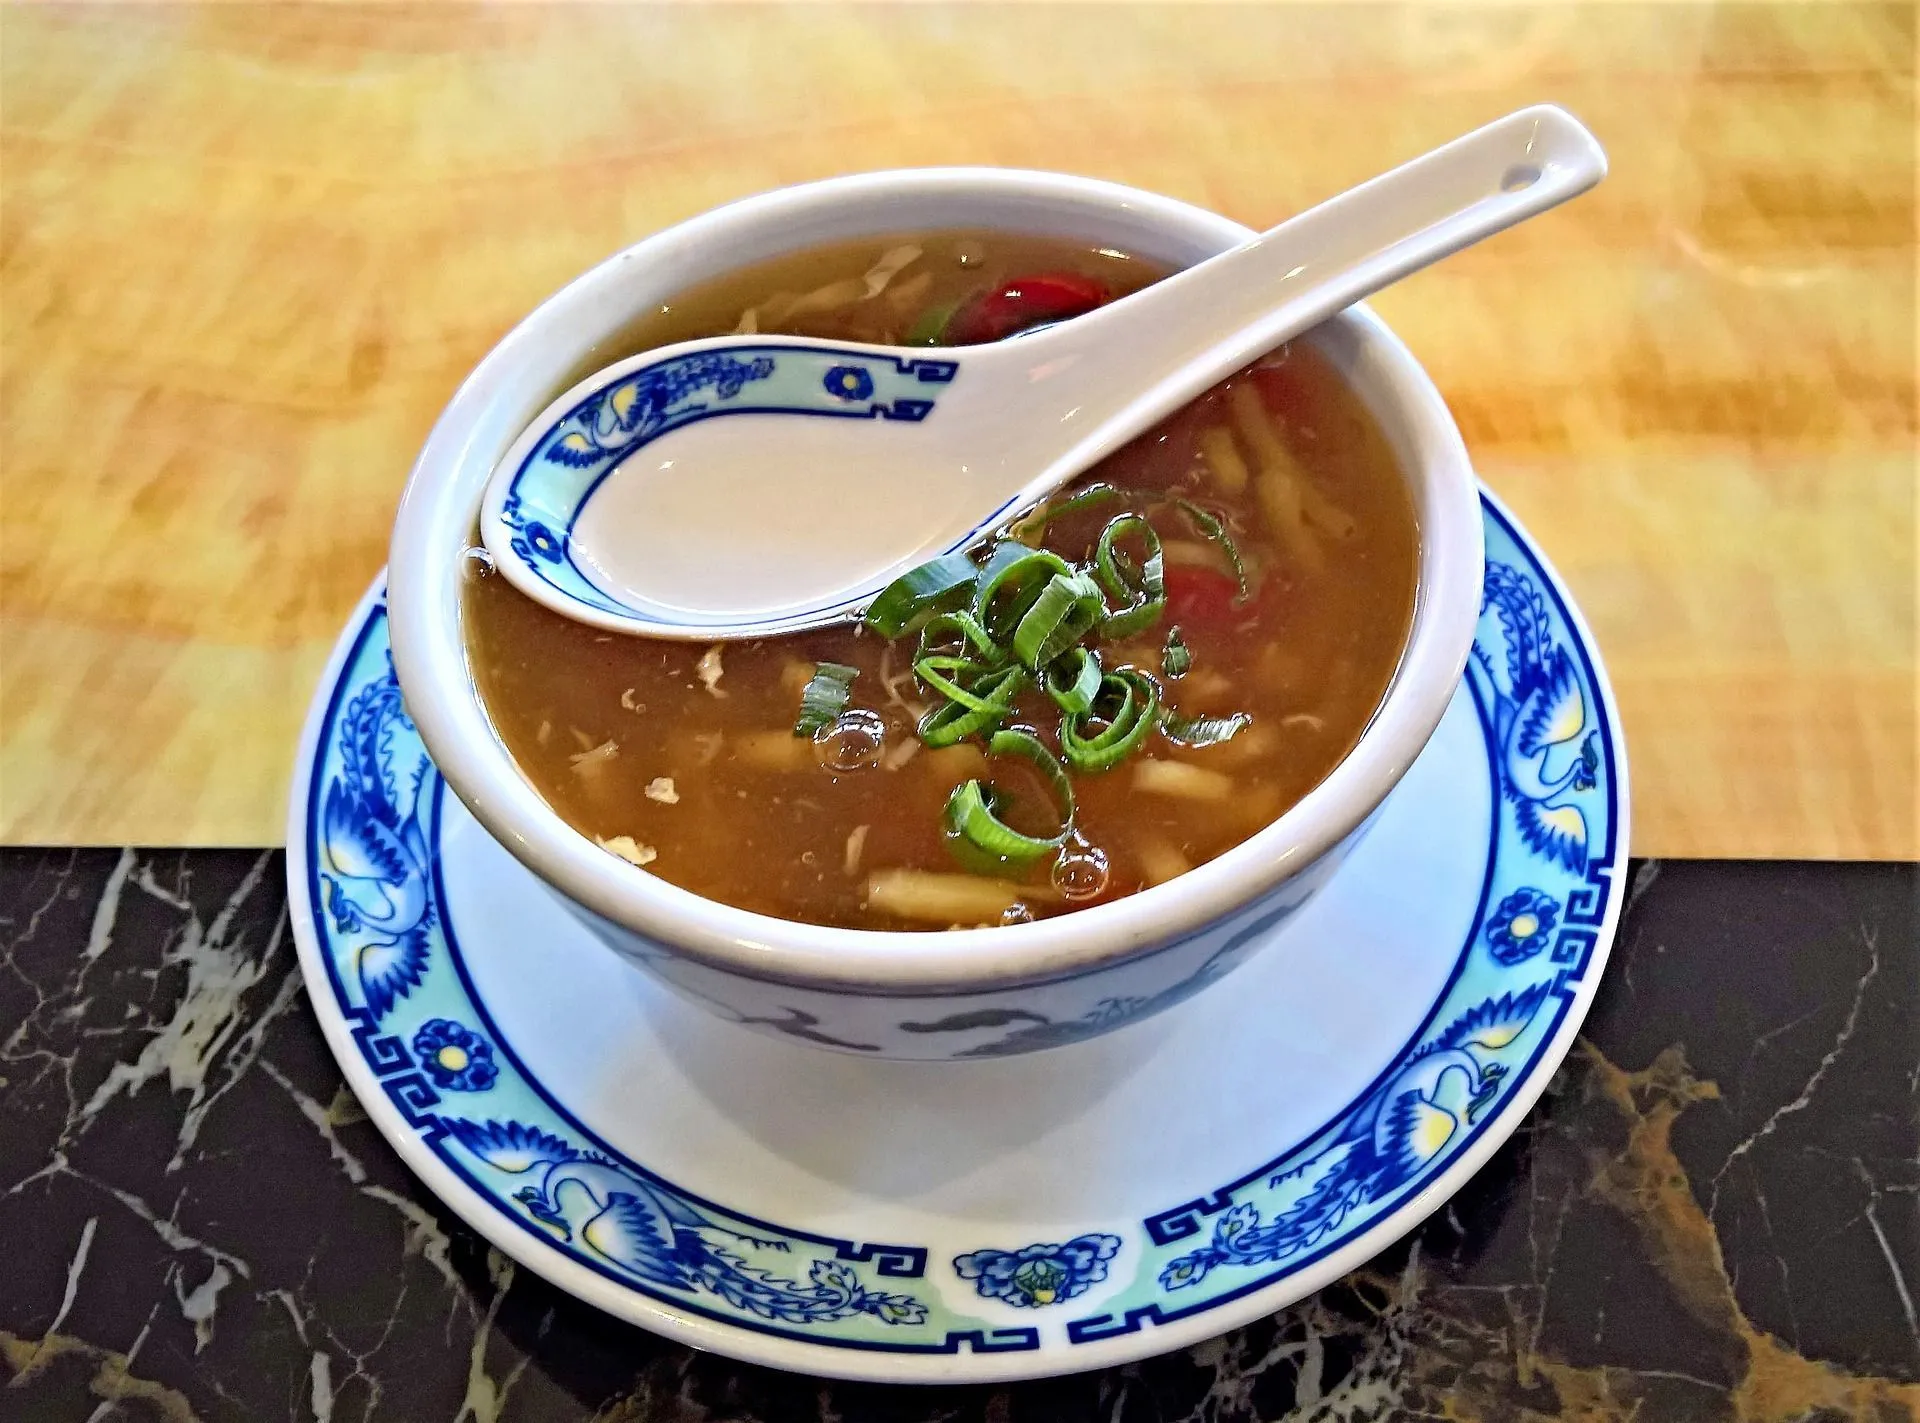 A bowl of hot and spicy soup is a perfect winter diet to ward off sniffles and chills.